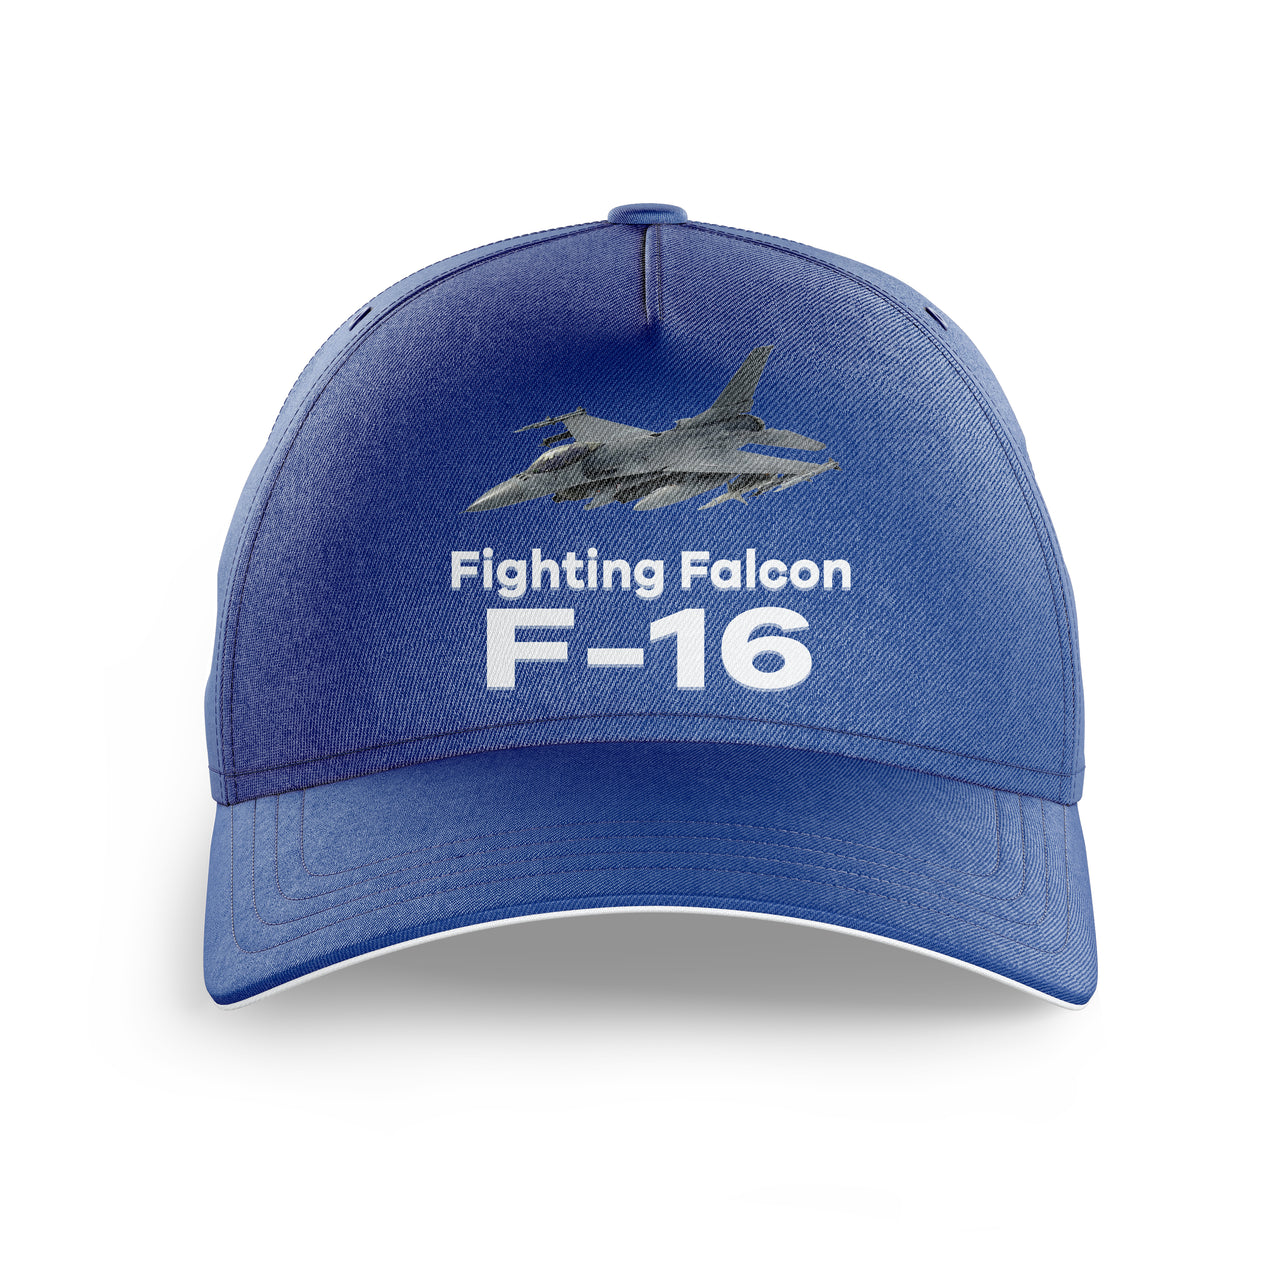 The Fighting Falcon F16 Printed Hats